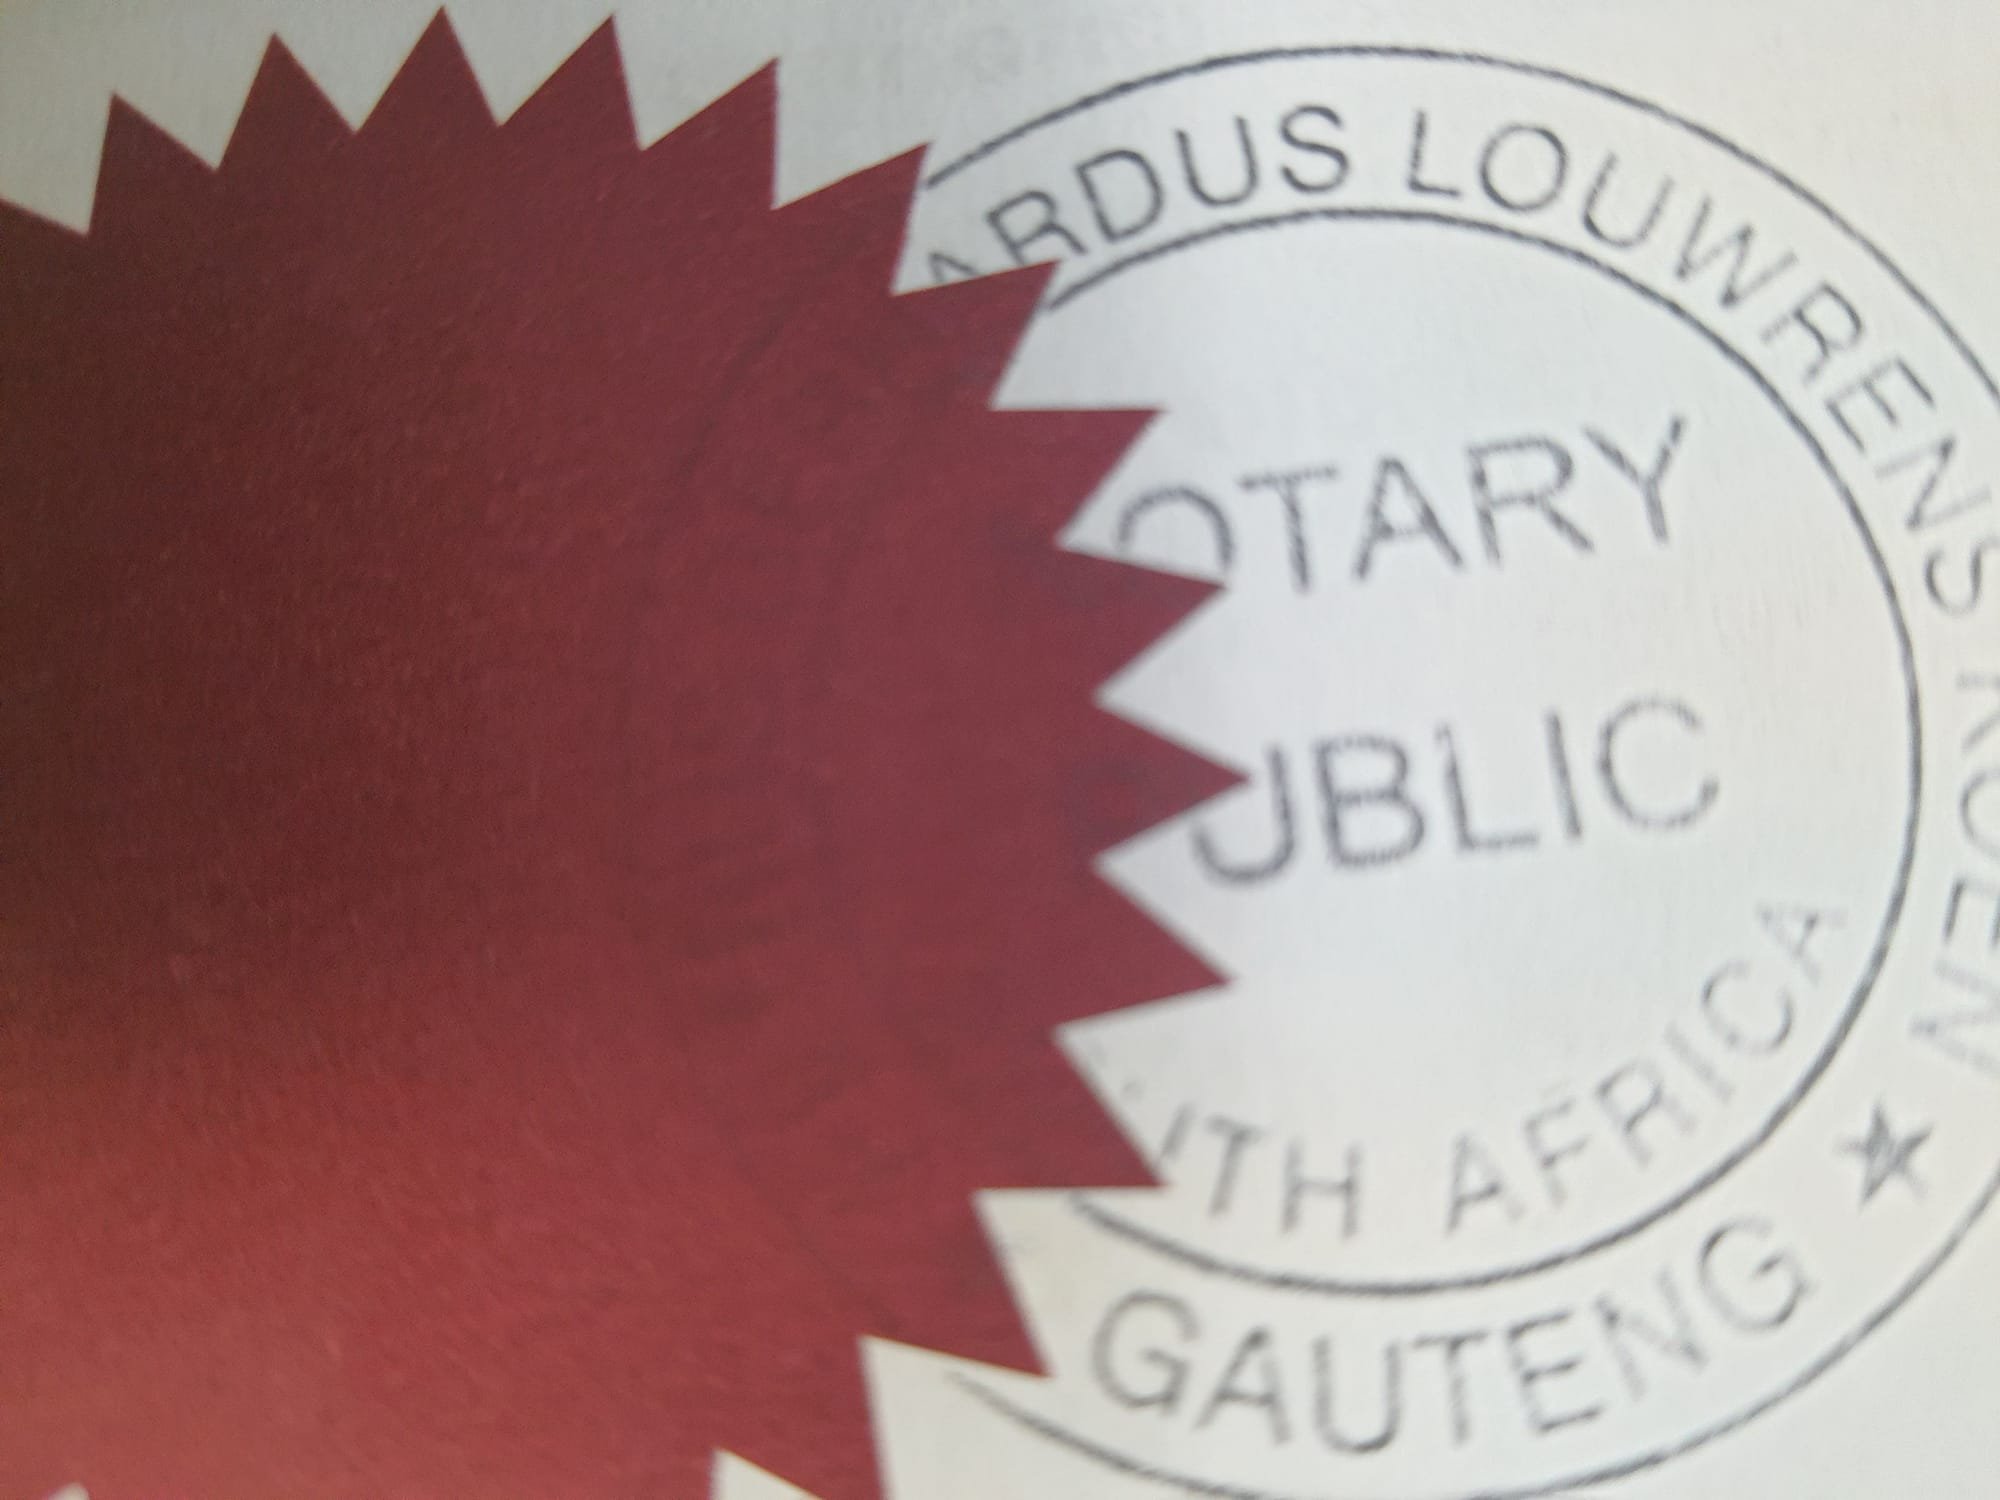 Notary Public Stamp and Red Seal